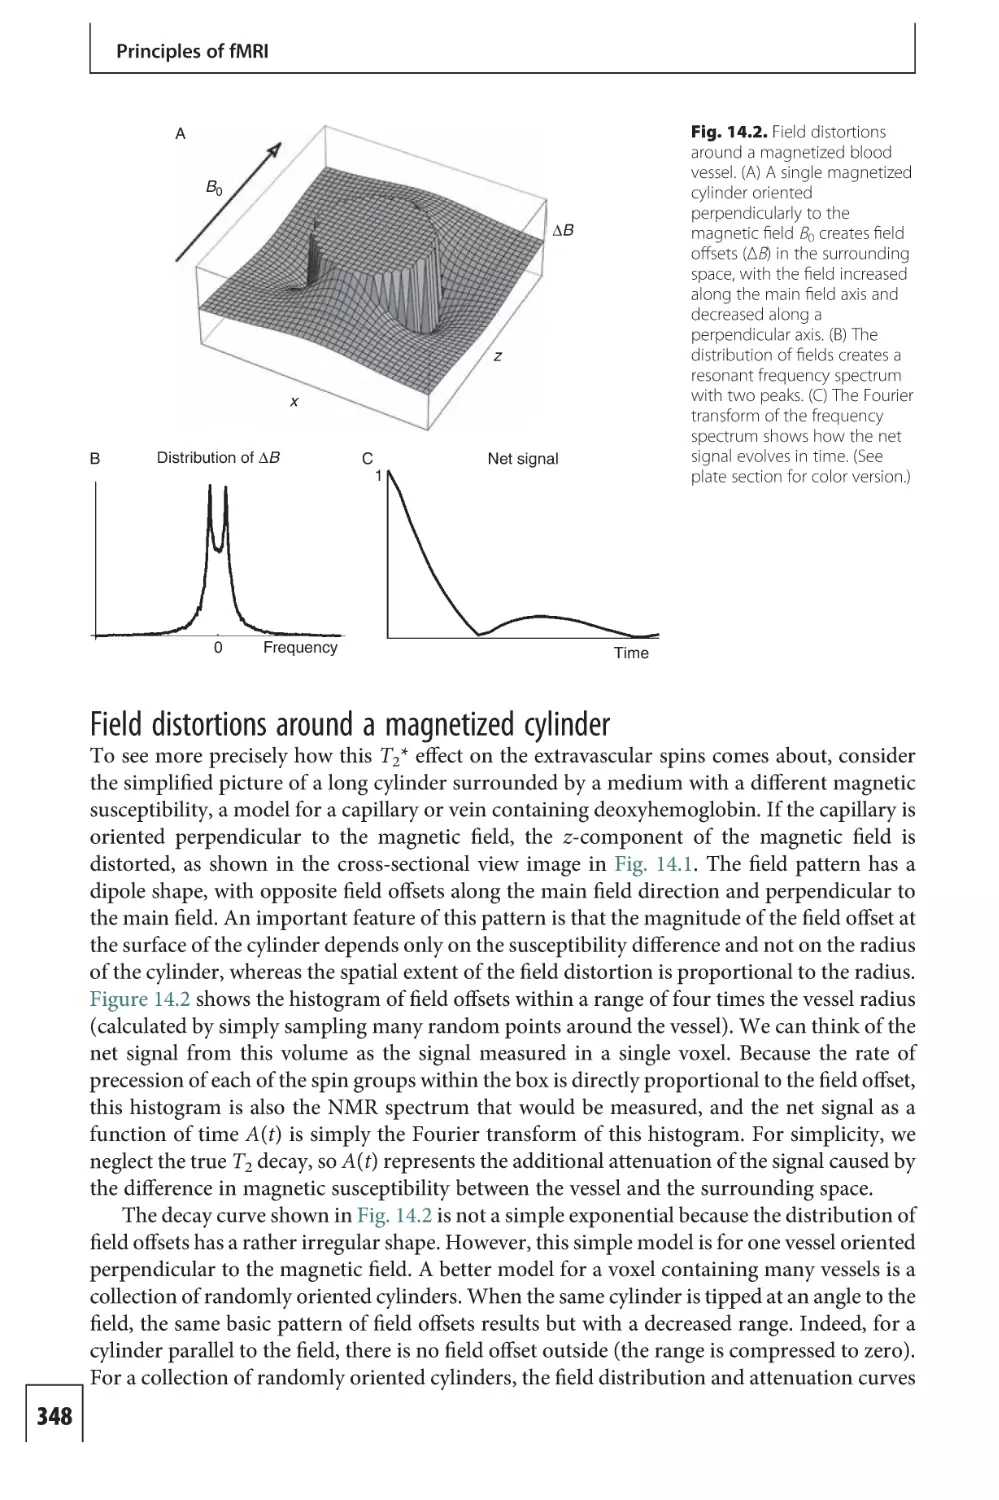 Field distortions around a magnetized cylinder